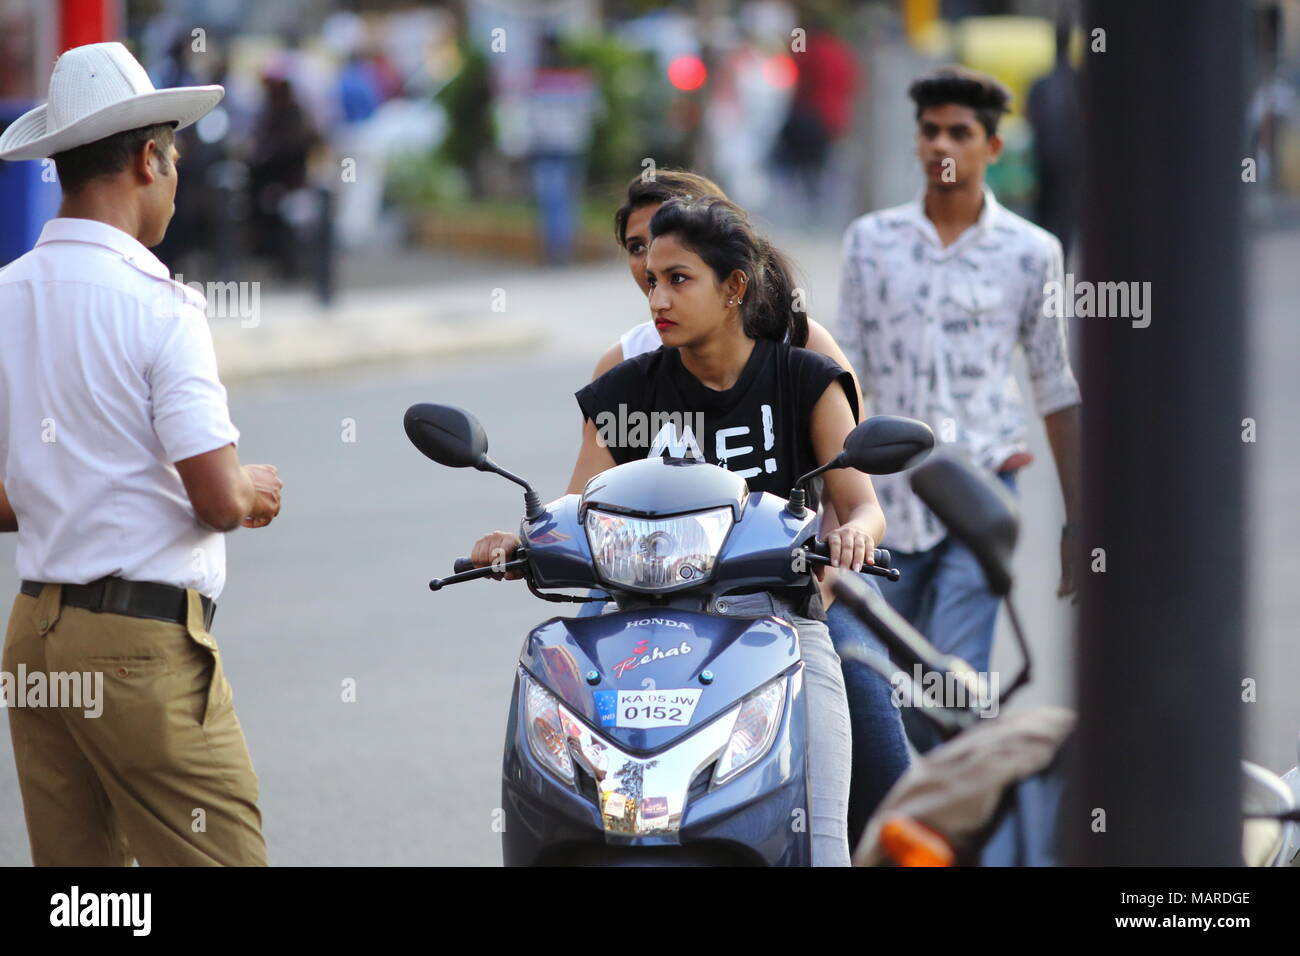 Bangalore, India - October 16, 2016: A local traffic police catches bike riders for violating the traffic rules of not wearing helmets. Stock Photo